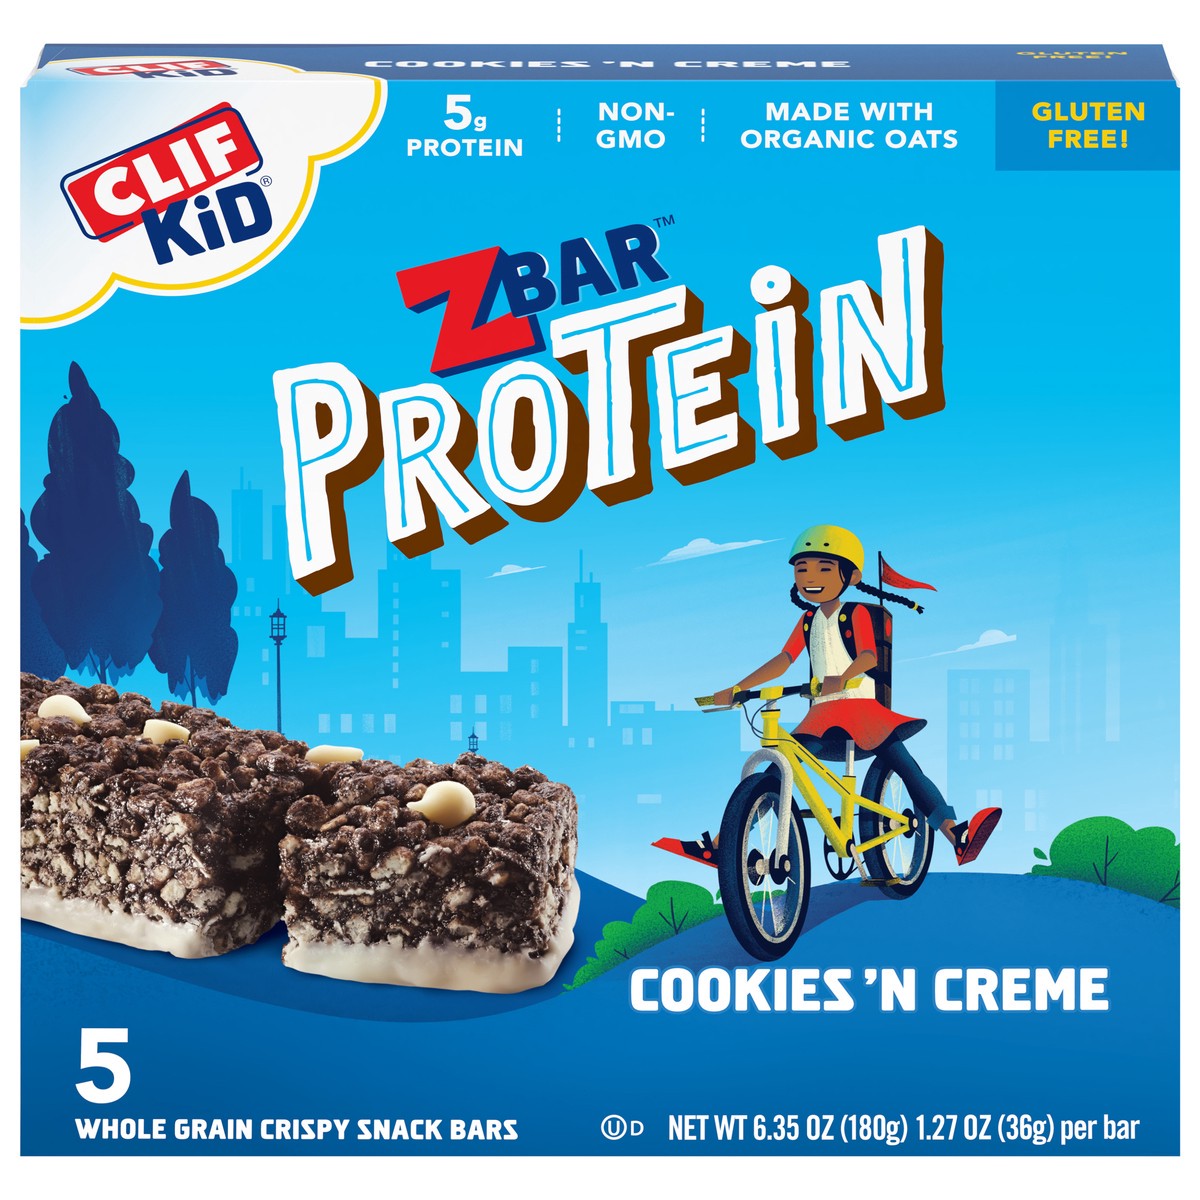 slide 1 of 9, Zbar Protein - Cookies 'n Creme - Crispy Whole Grain Snack Bars - Made with Organic Oats - Non-GMO - 5g Protein - 1.27 oz. (5 Pack), 5 ct; 6.35 oz